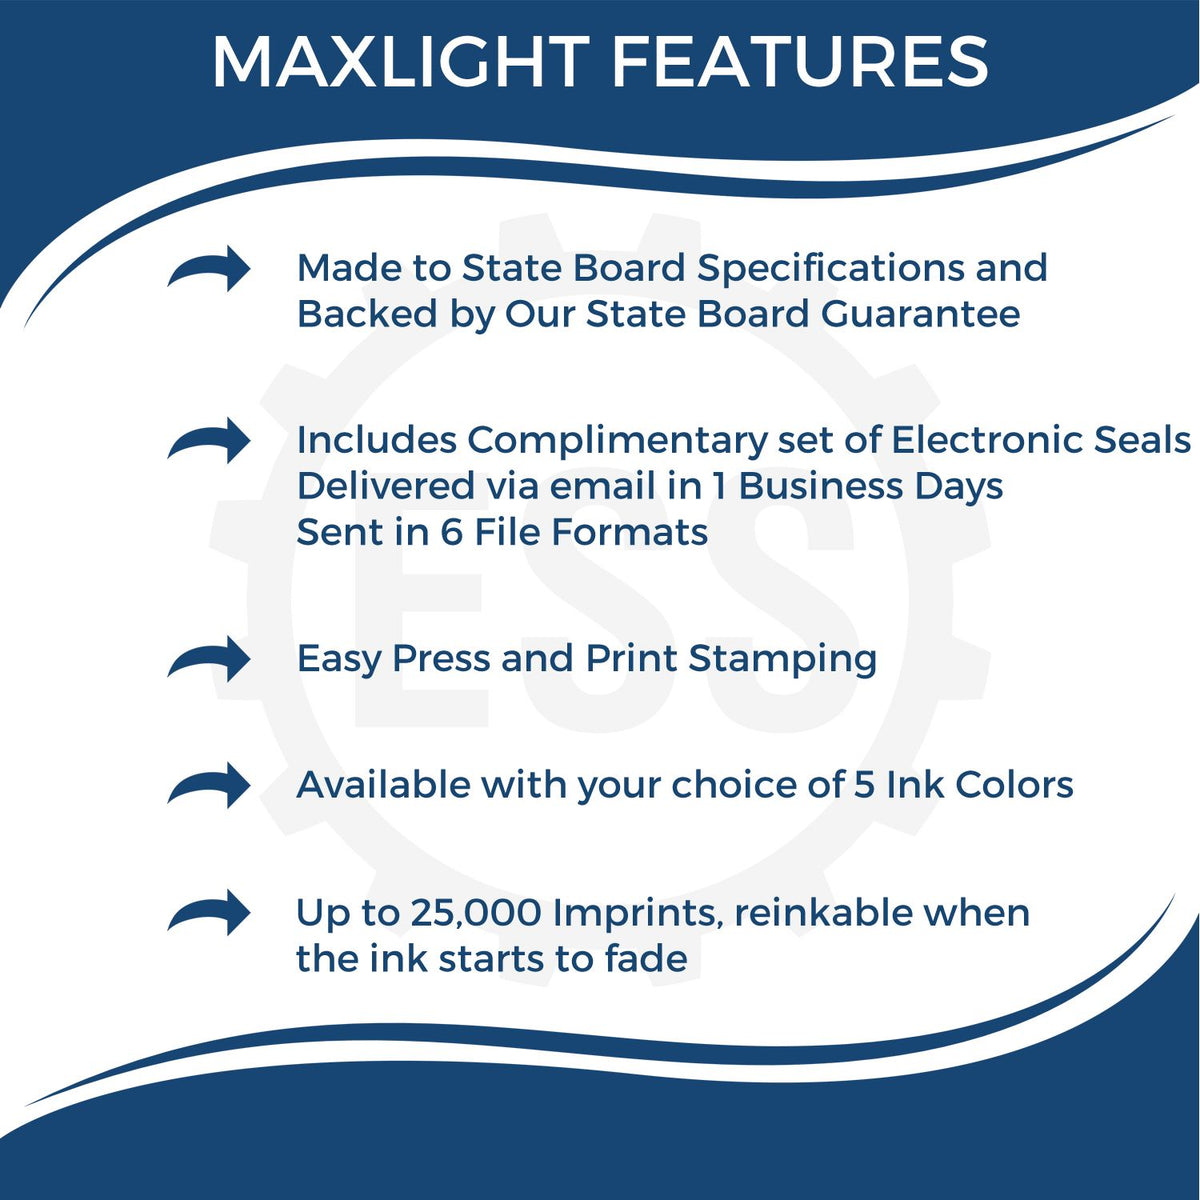 A picture of an infographic highlighting the selling points for the Premium MaxLight Pre-Inked West Virginia Engineering Stamp